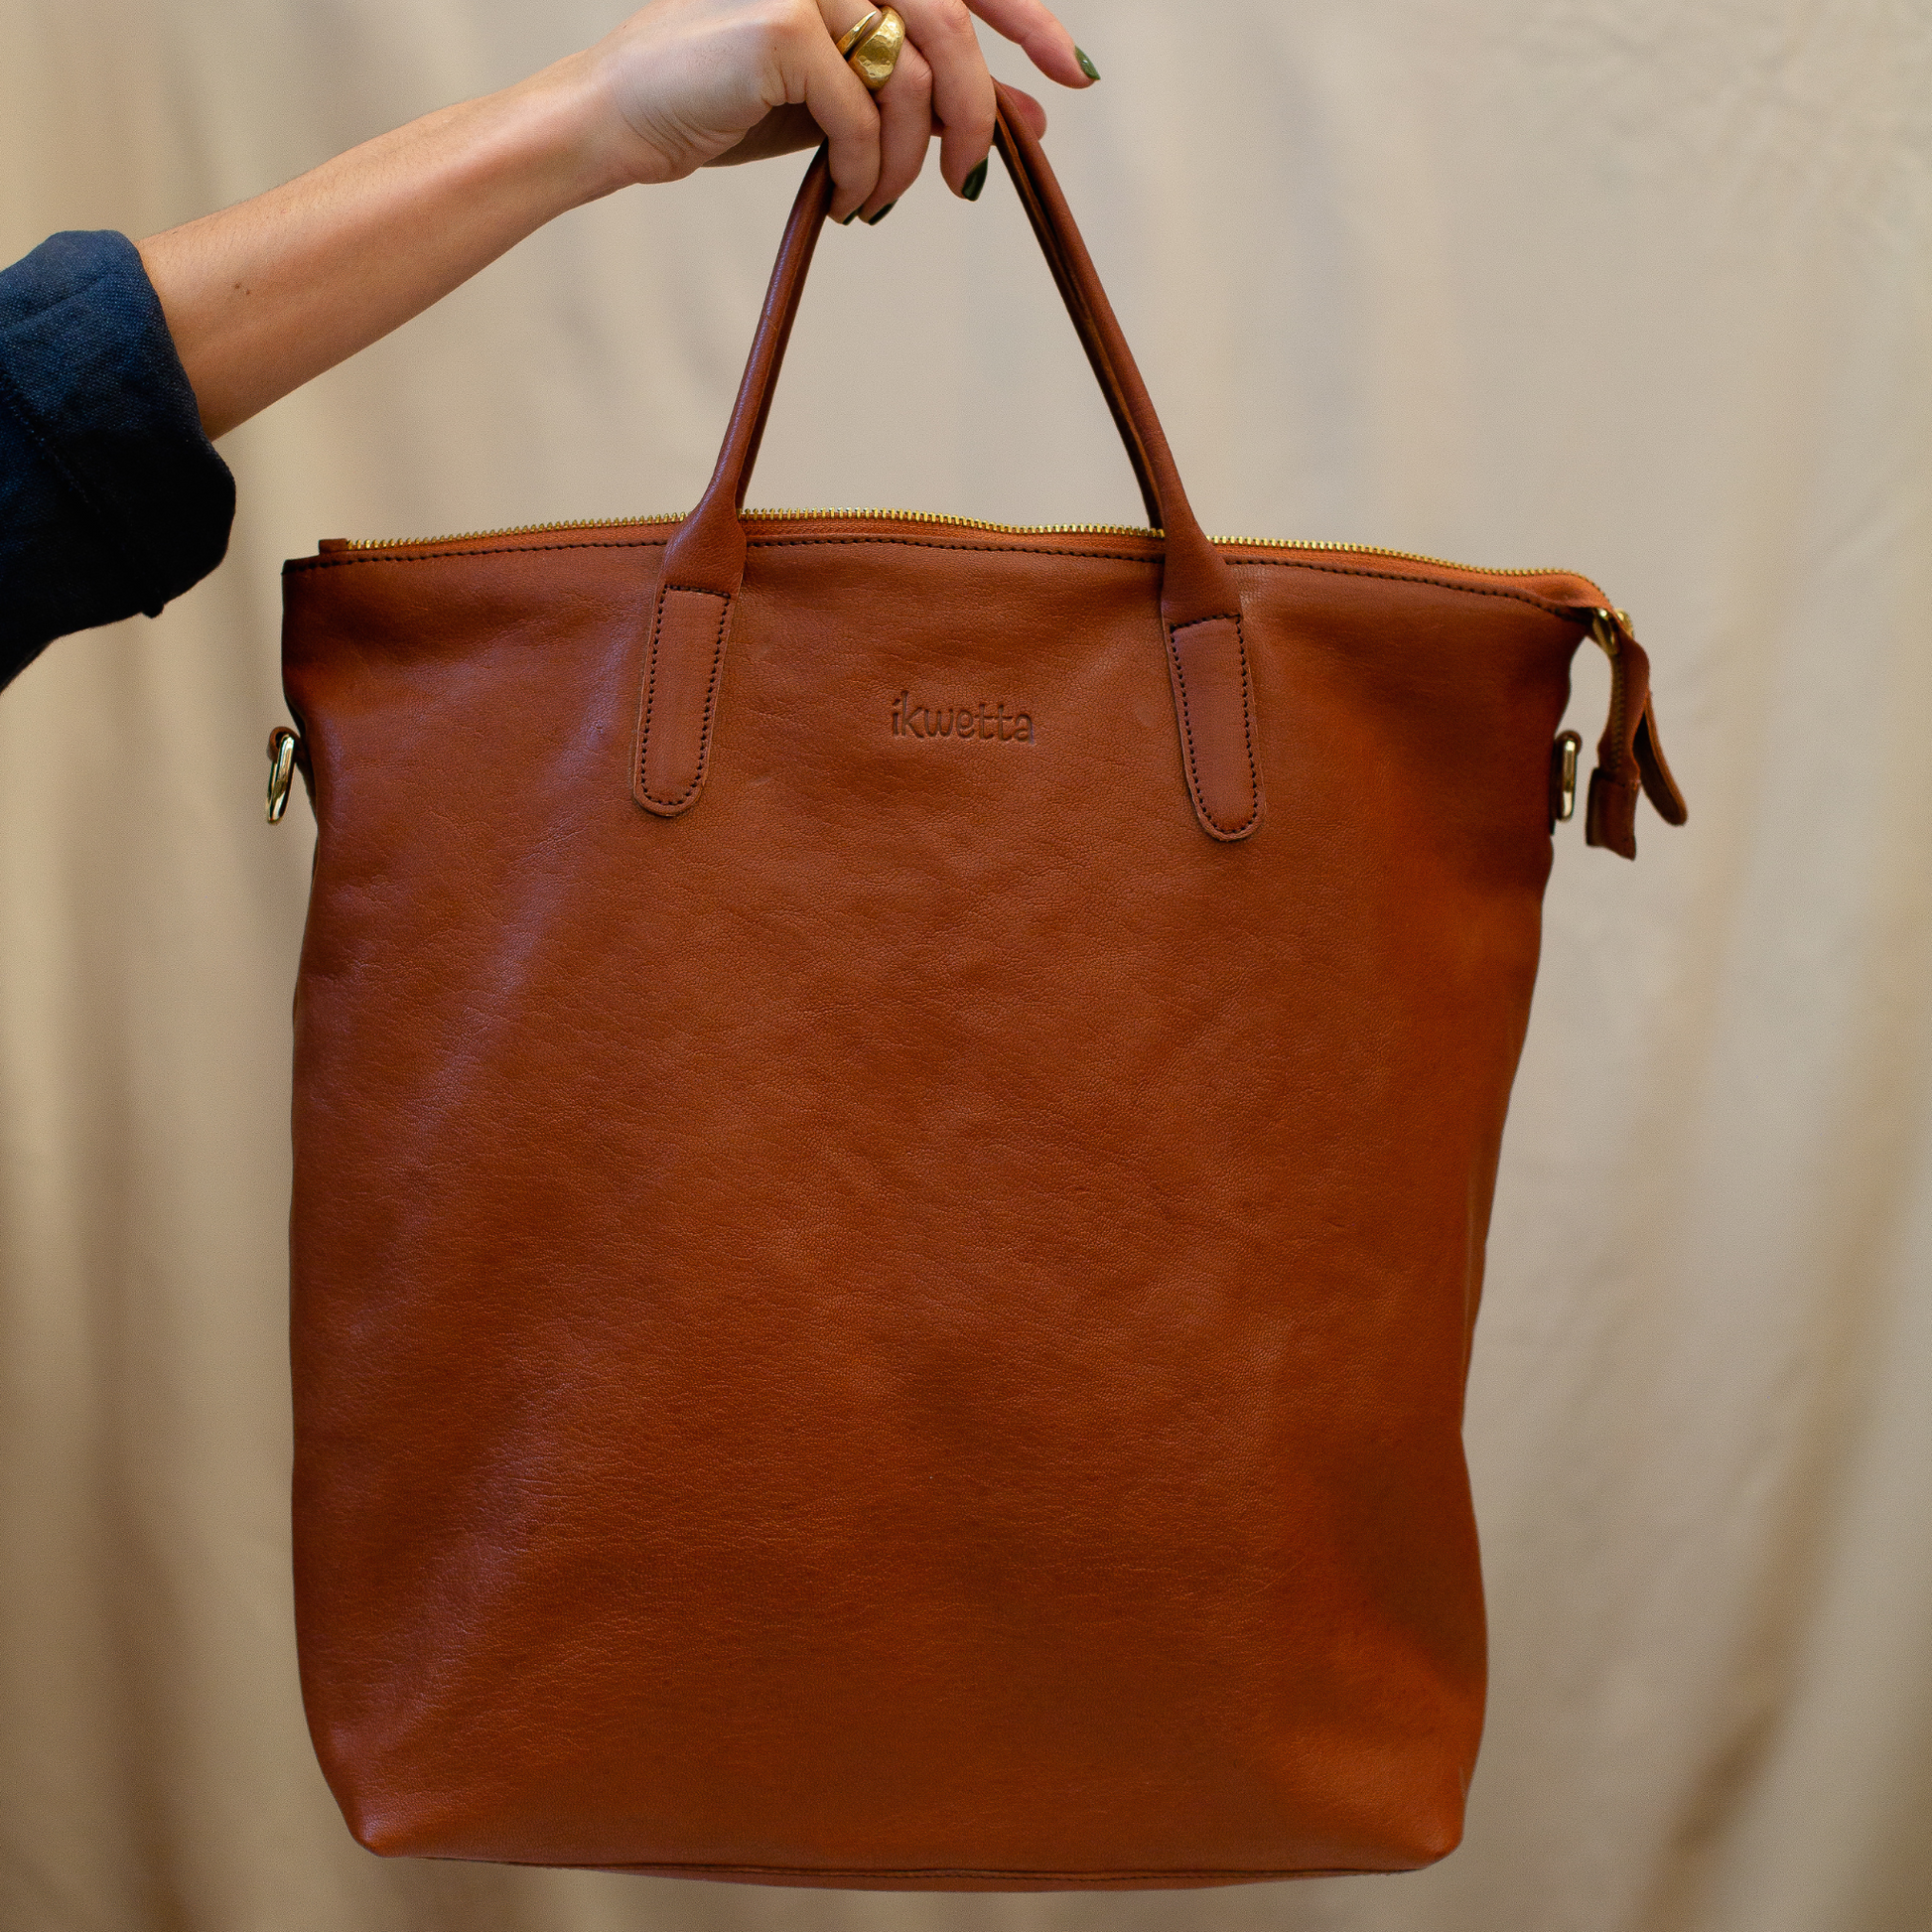 Werk tote in caramel smooth leather